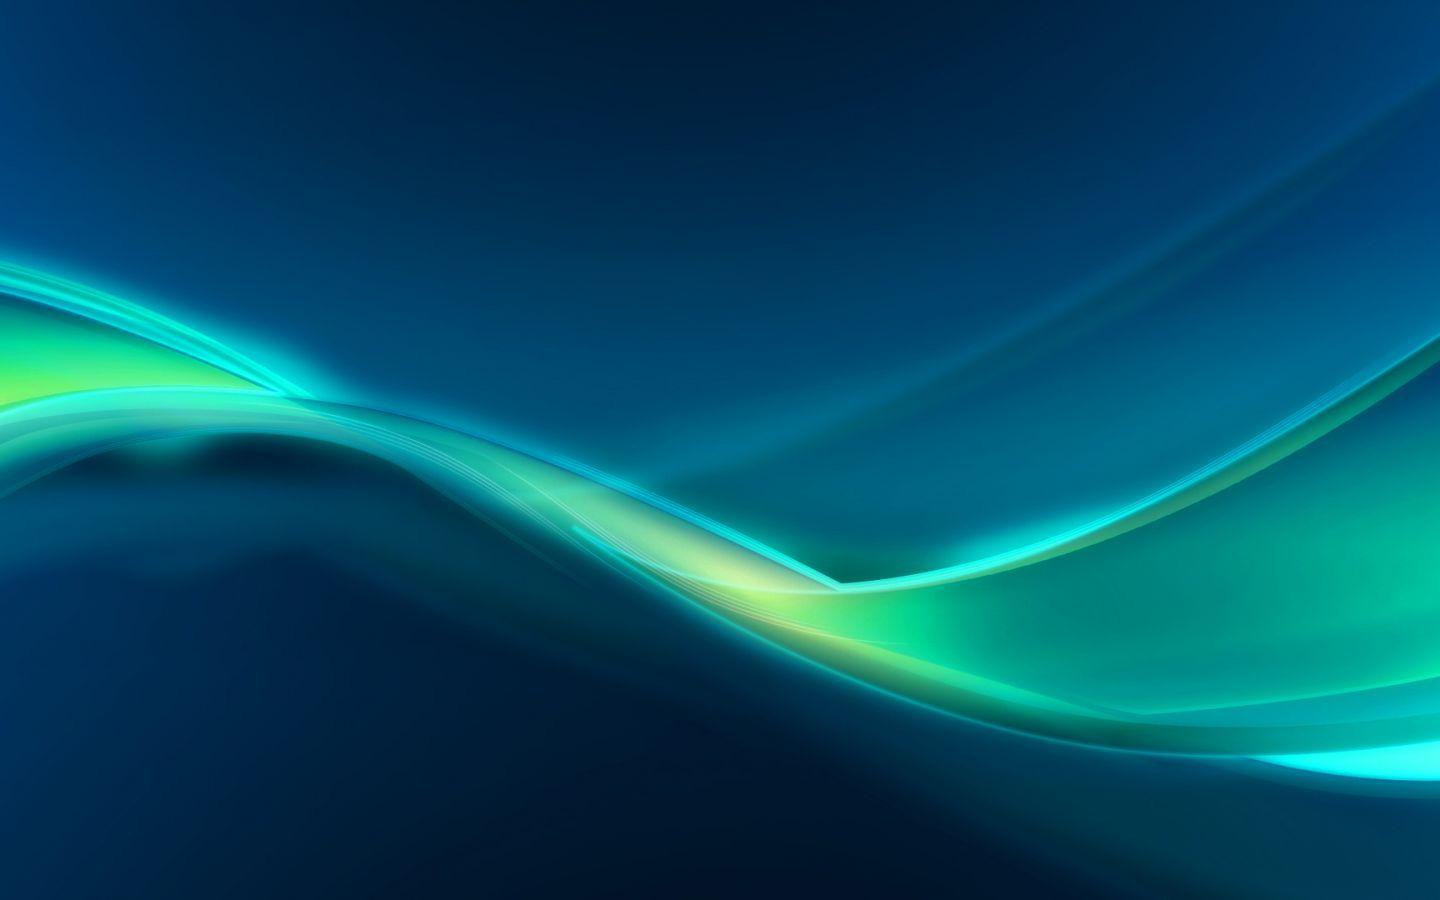 Abstract 1080p 1080p Wallpaper 720p HD Wallpaper Background